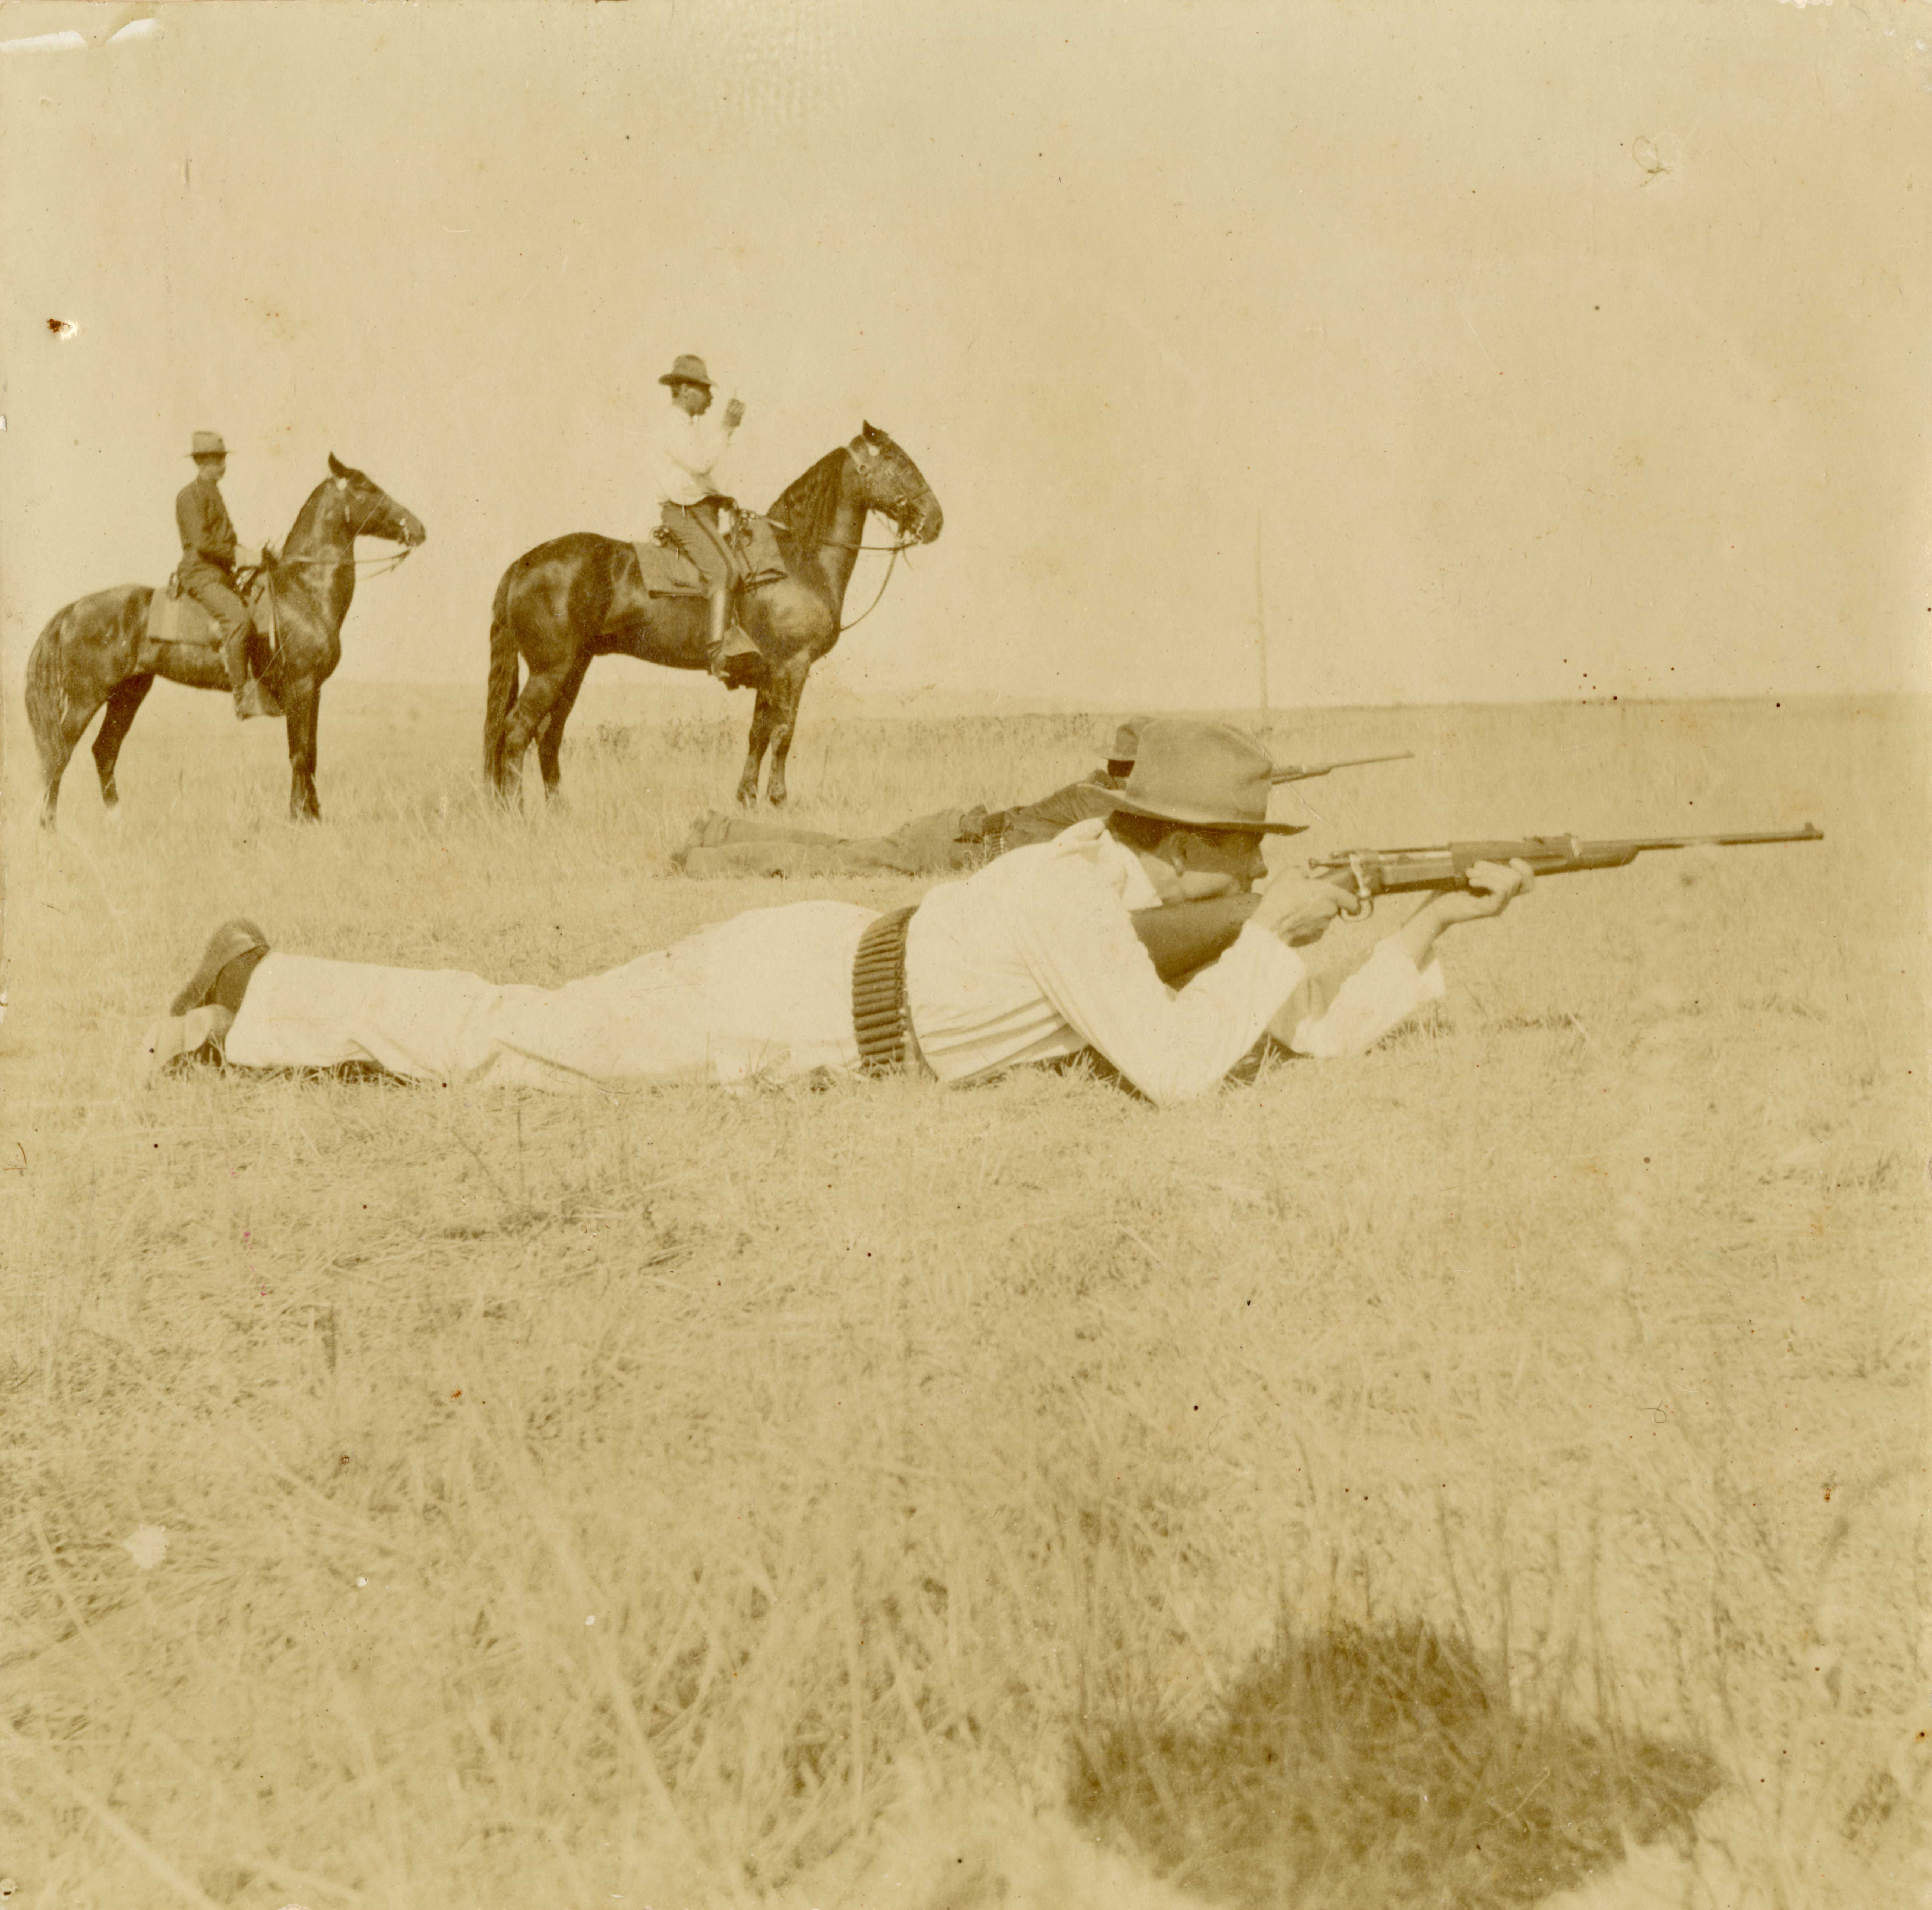 [Soldier shooting in the prone position, two men  on horseback behind him]